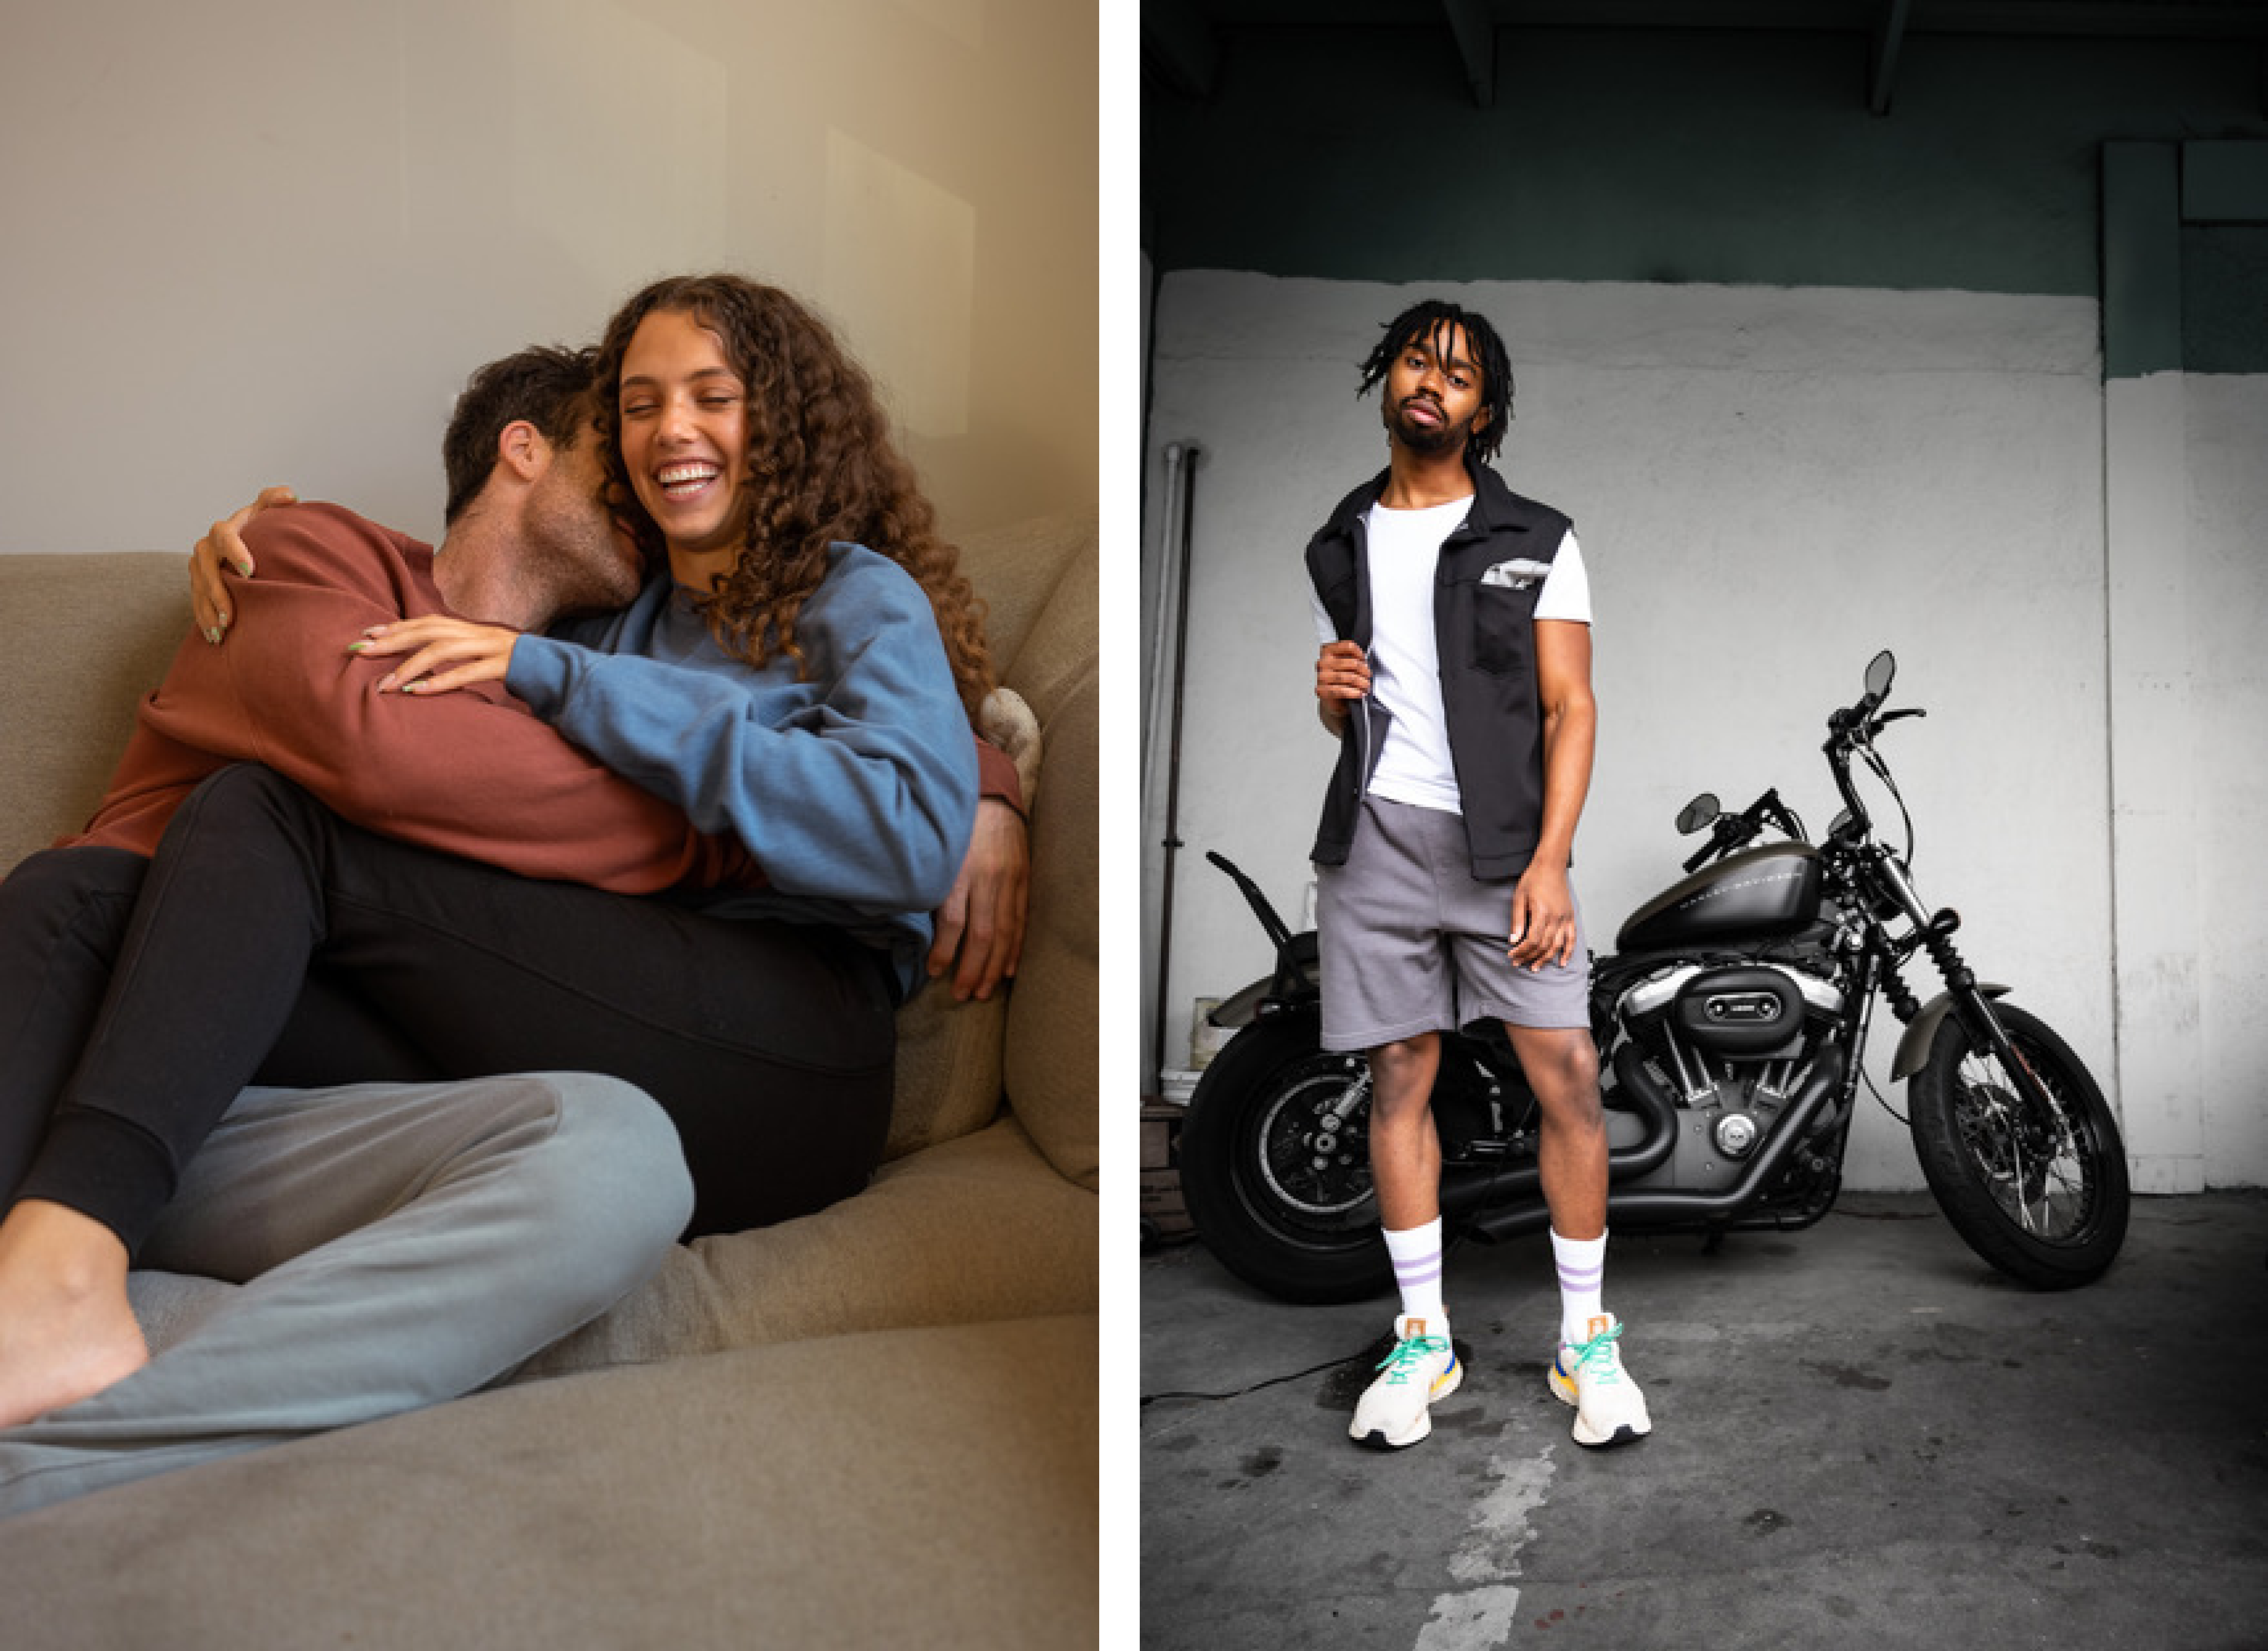 2 images side by side of people wearing XIVI clothing. The first image shows two people smiling, and hugging each other on a brown couch. The woman is wearing black leggings and a baggy blue crewneck sweater. The man is wearing an orange crewneck sweater and light grey sweatpants. The other image shows a man posing in front of a black motorcycle. He is wearing a white T-shirt, a black vest on top, grey shorts, and white crew socks with running shoes.